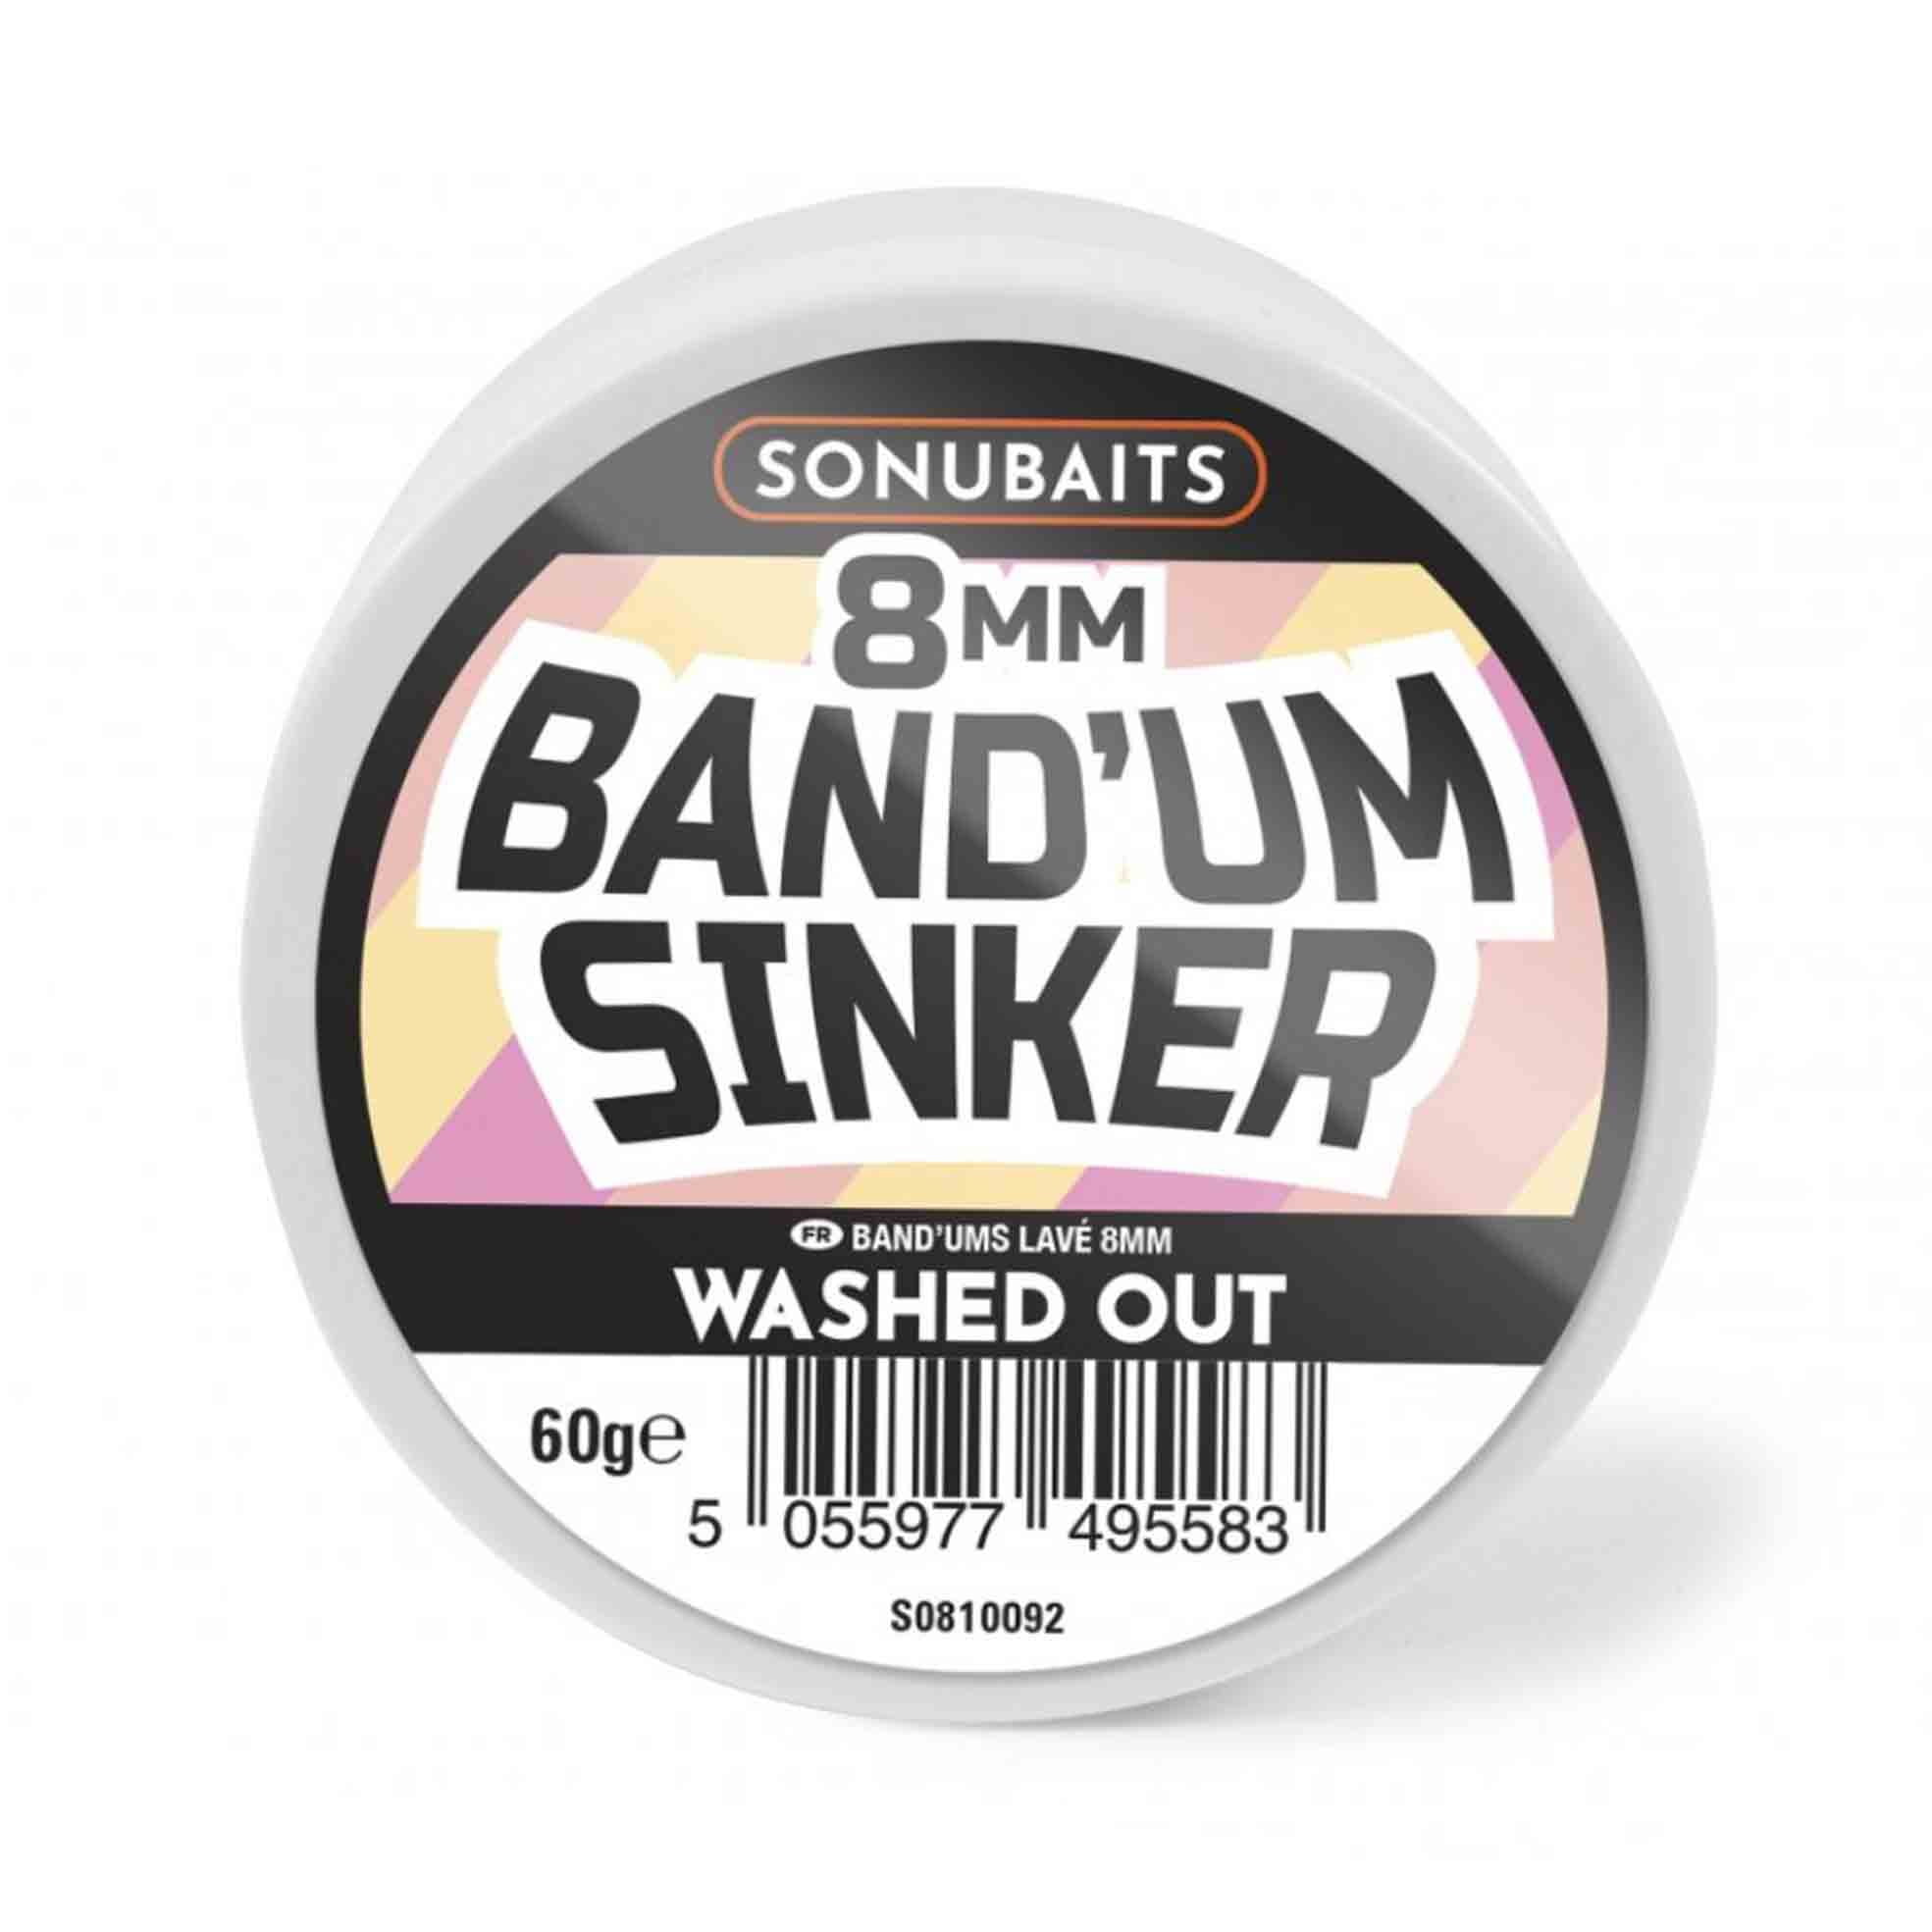 Sonubaits Band'um Sinkers Washed Out 8mm 60g